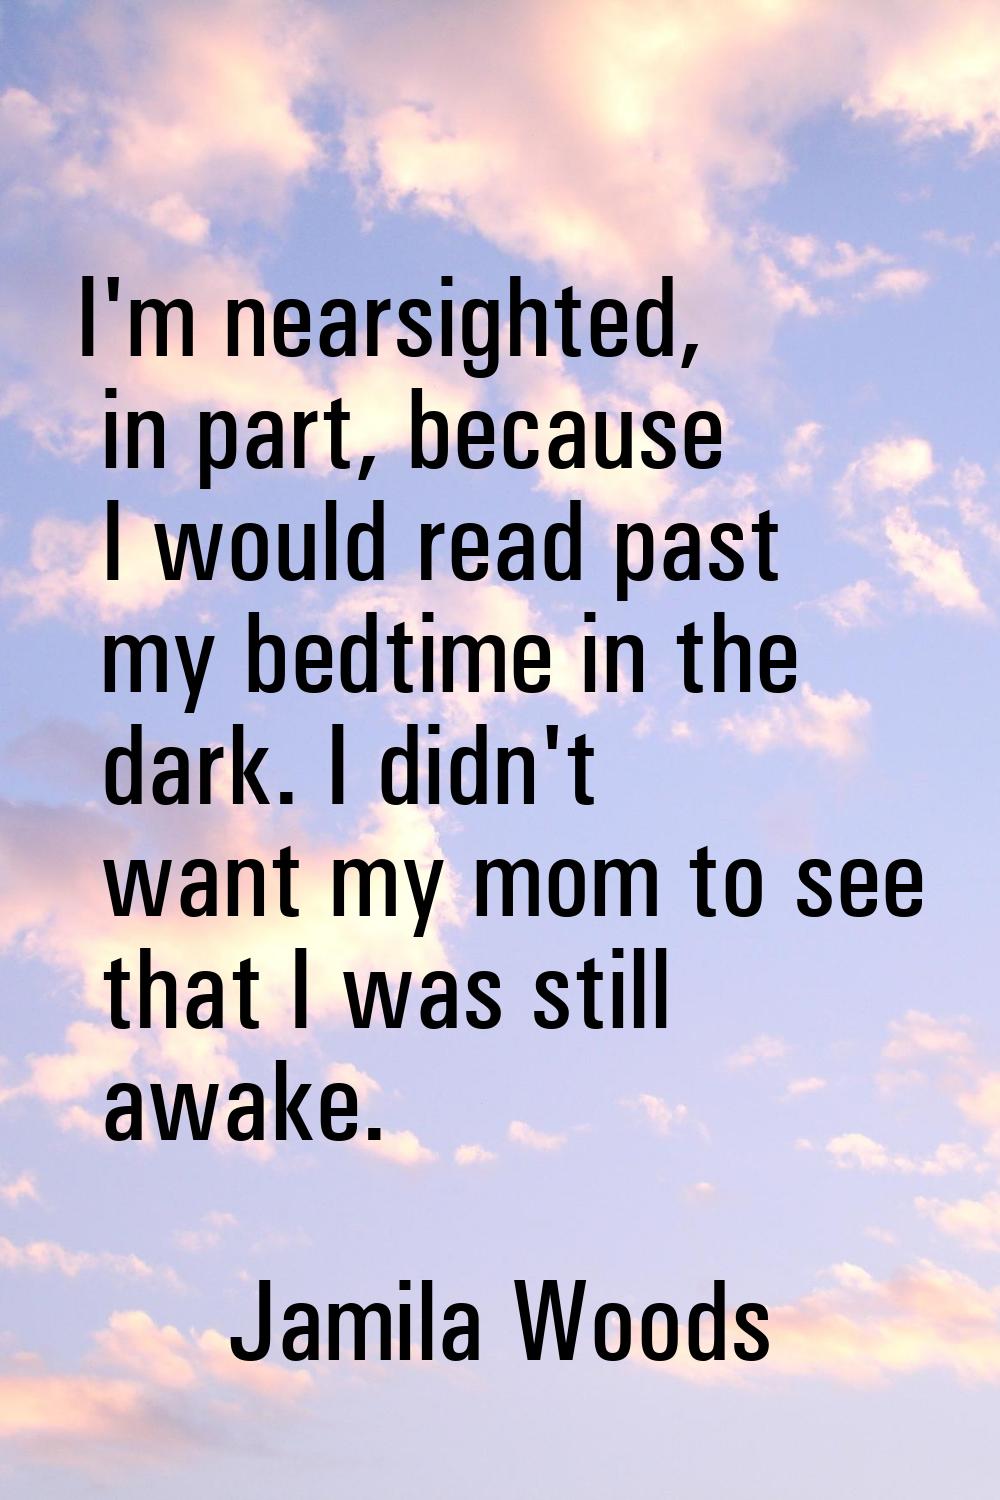 I'm nearsighted, in part, because I would read past my bedtime in the dark. I didn't want my mom to